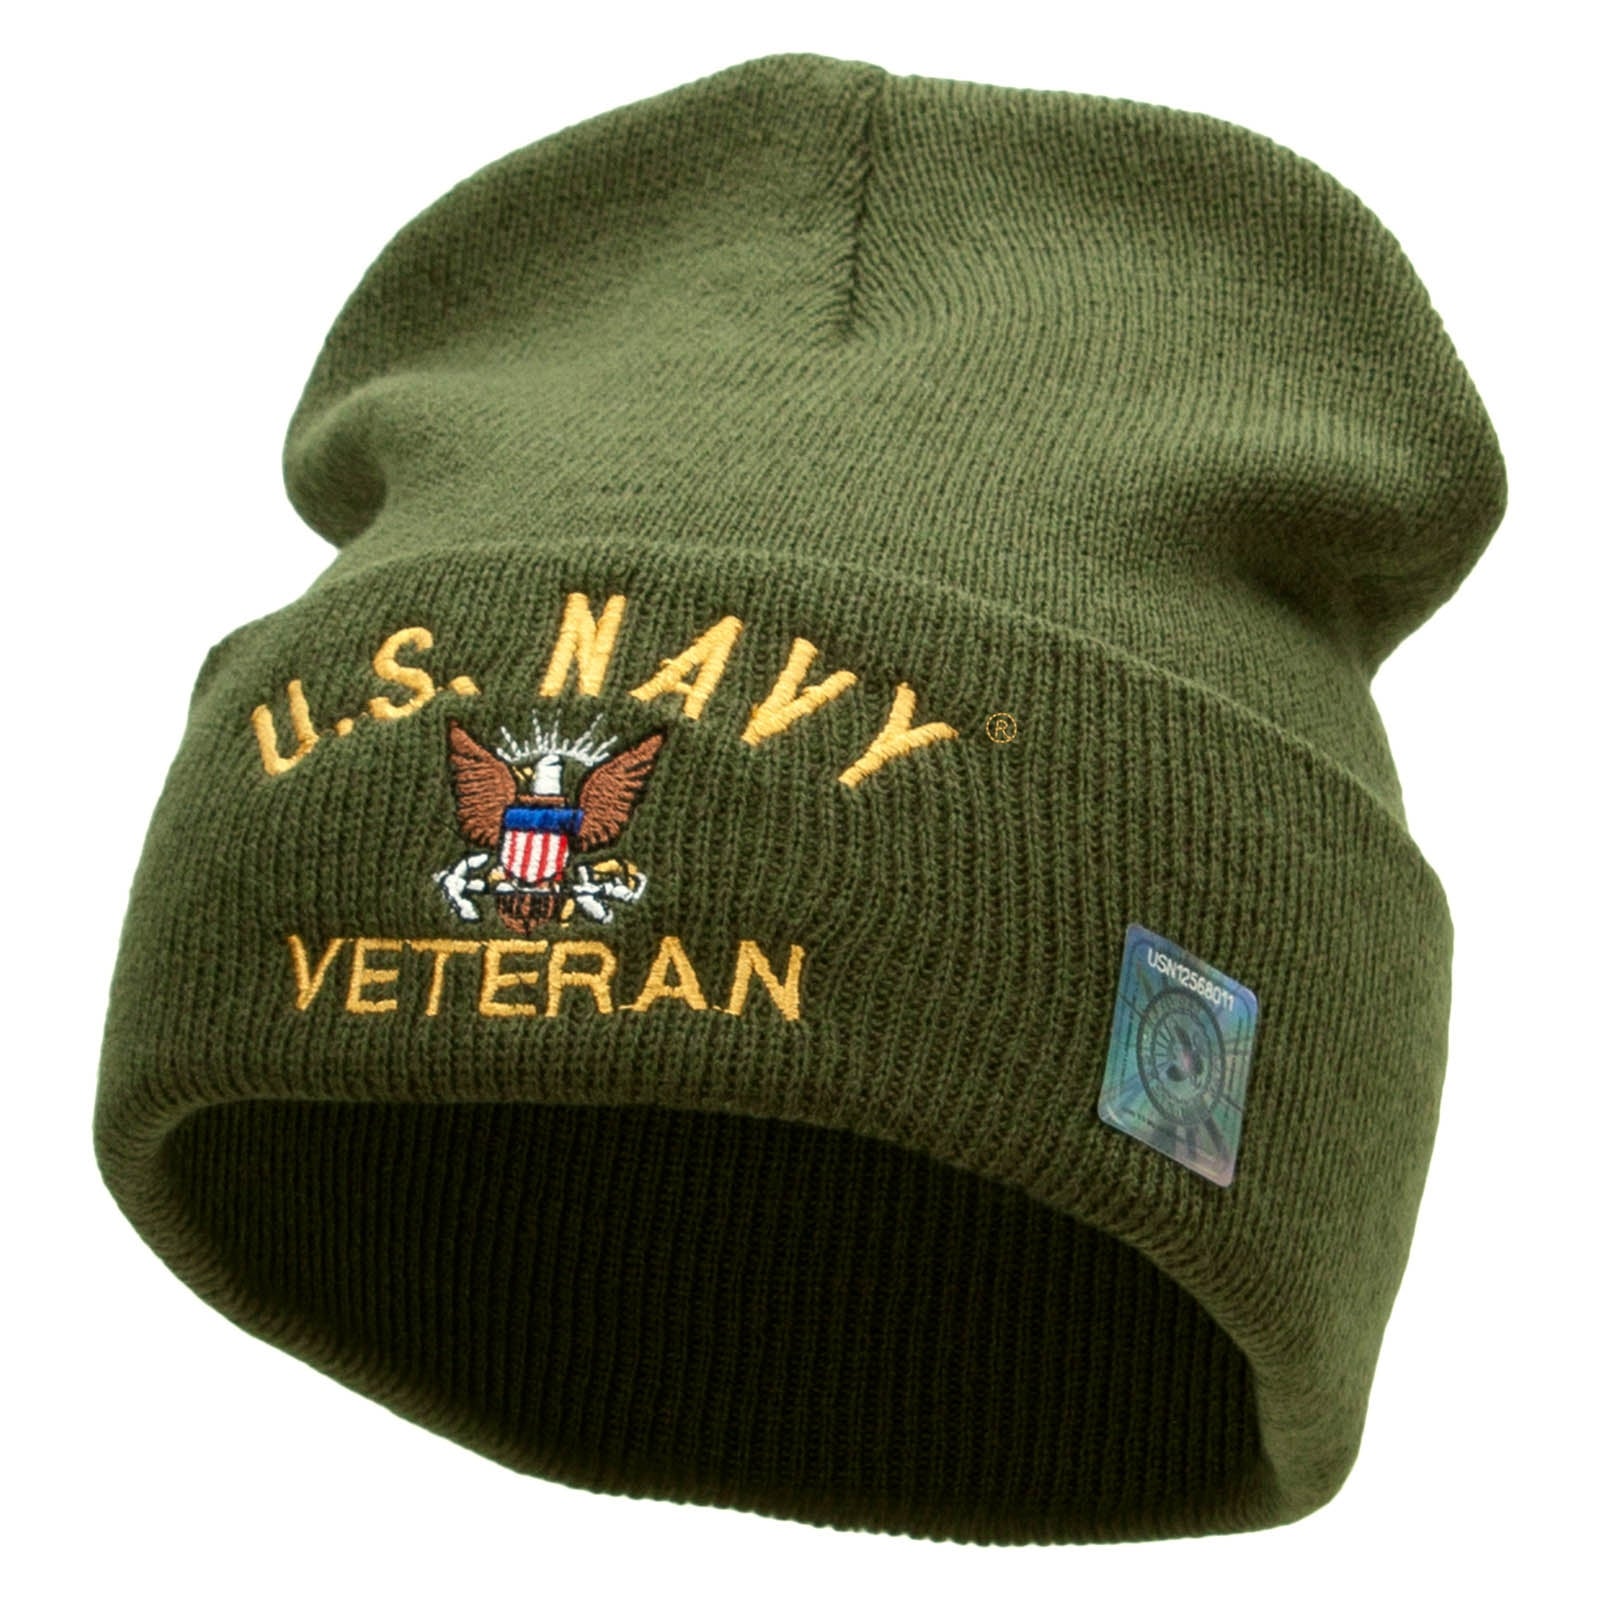 Licensed US Navy Veteran Military Embroidered Long Beanie Made in USA - Olive OSFM